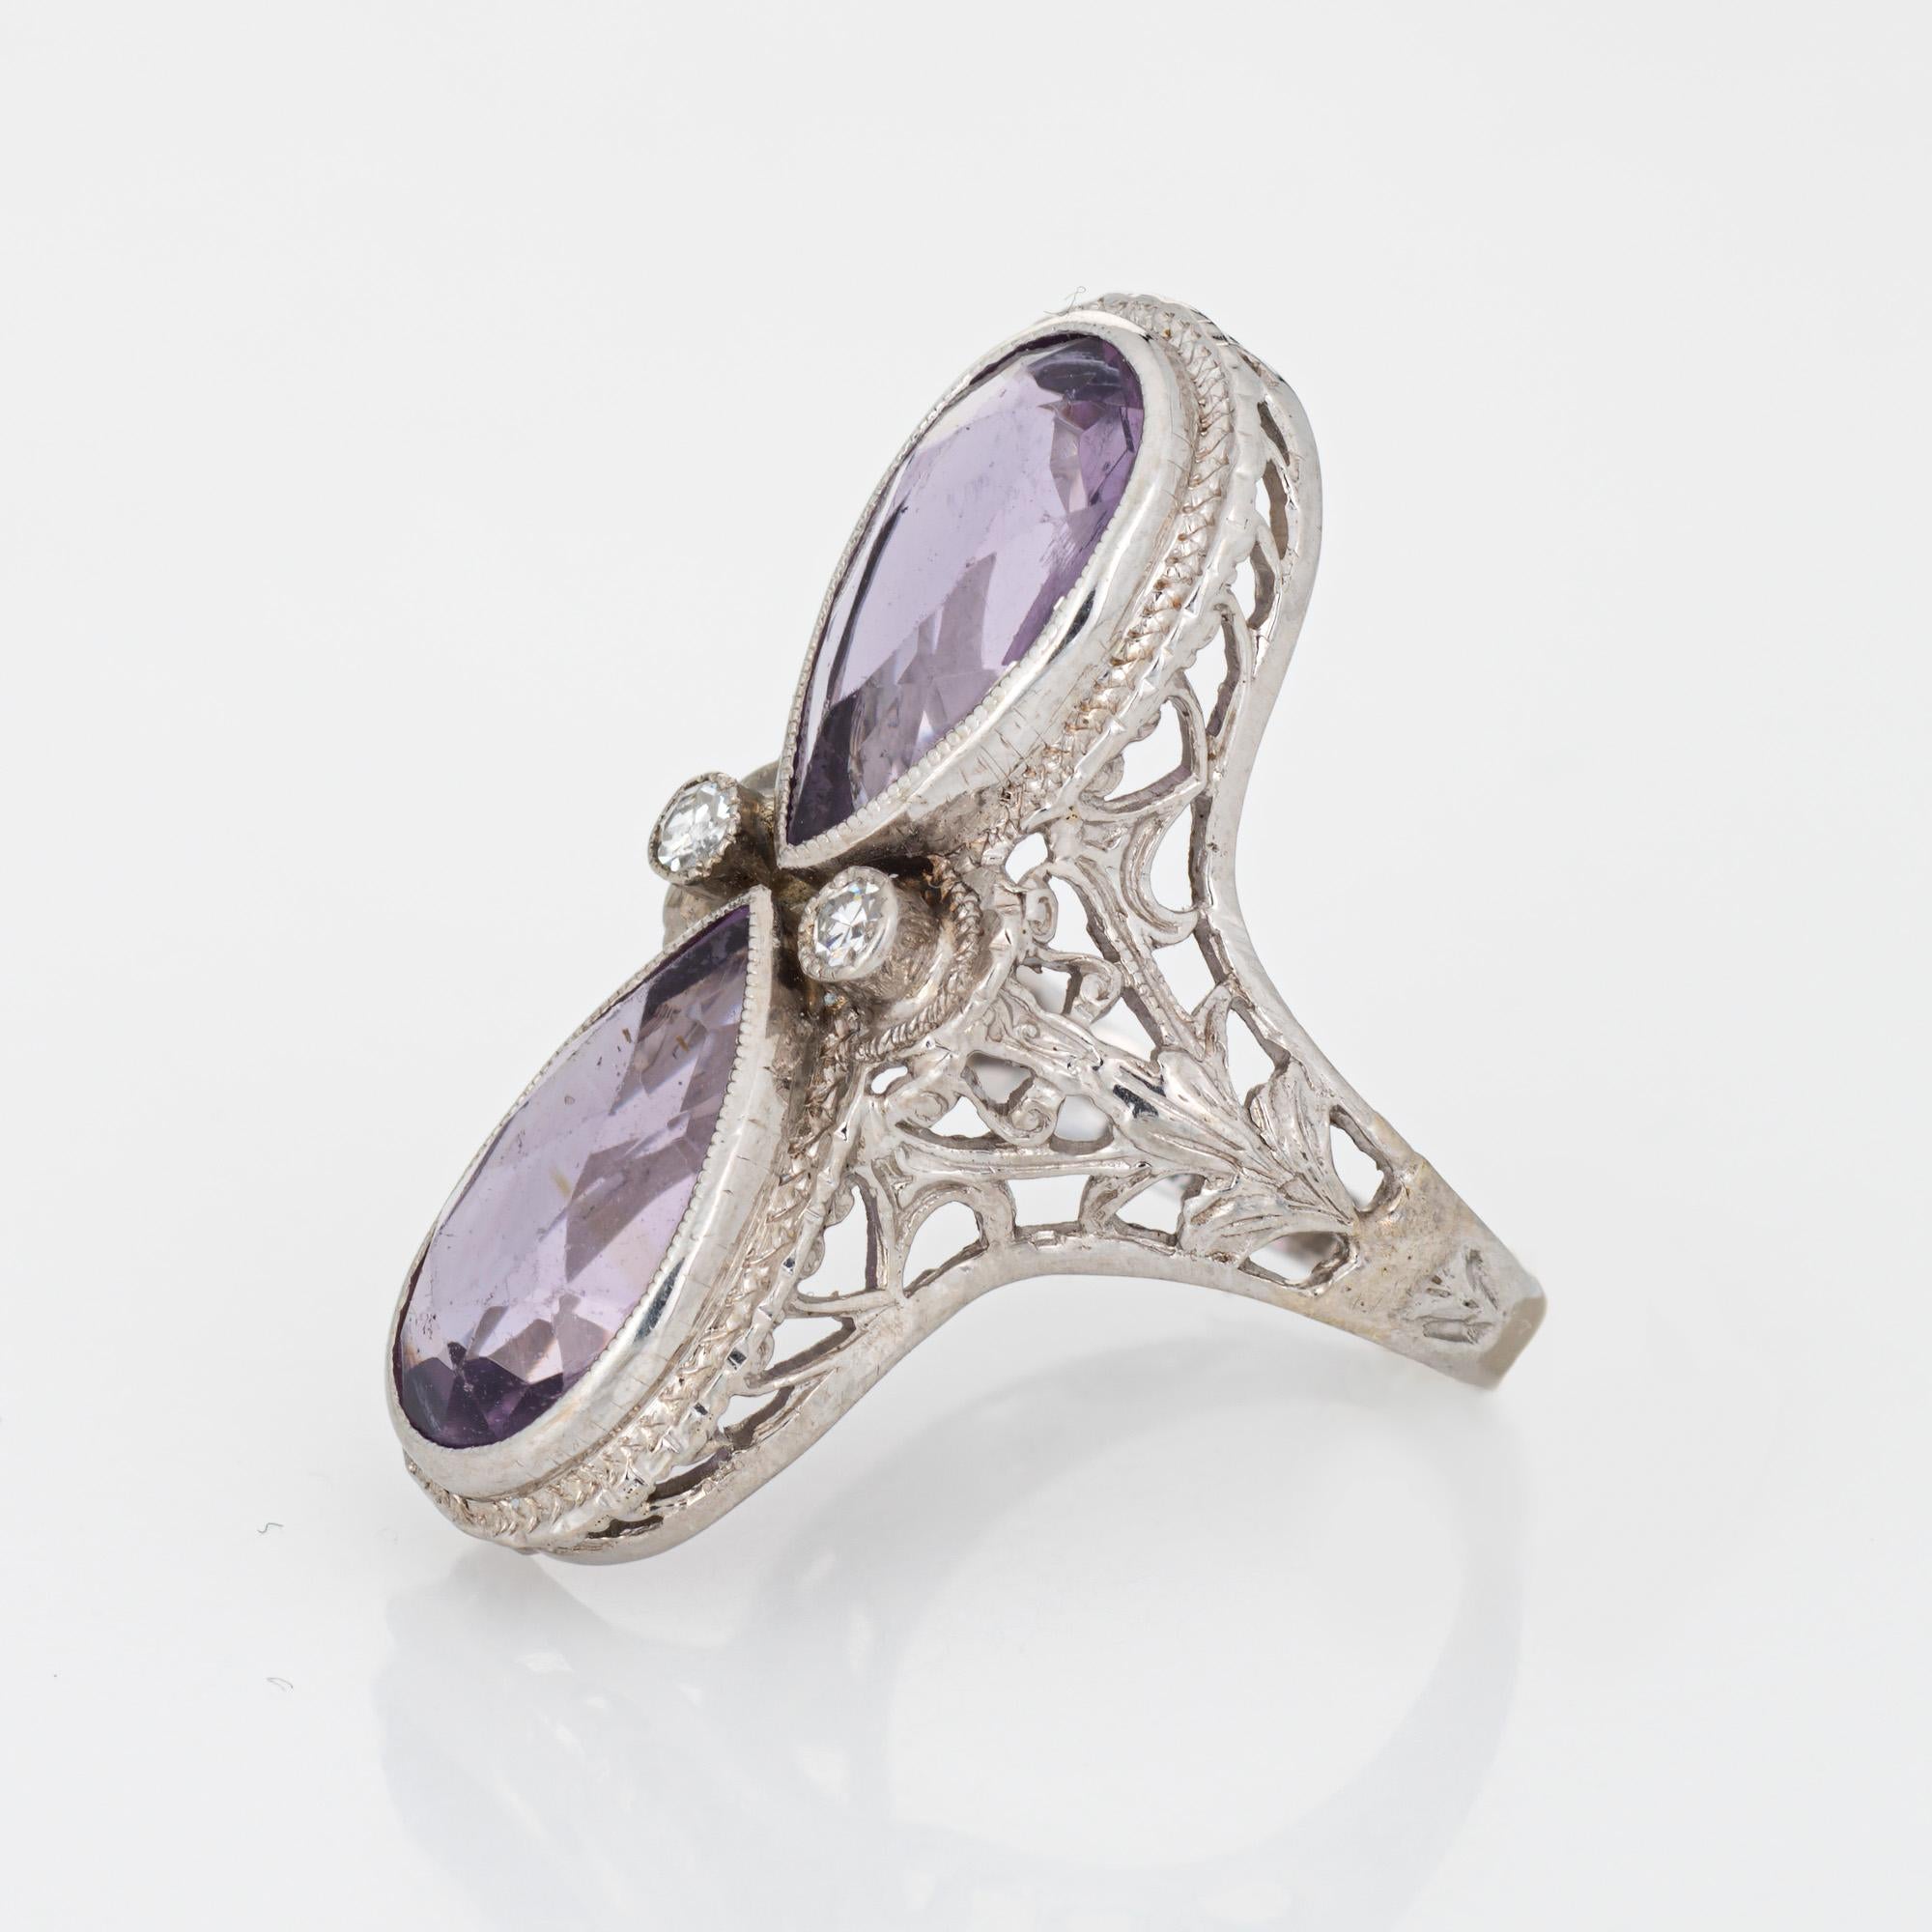 Vintage Art Deco Amethyst Diamond Ring Filigree 14k White Gold Elongated Pear 4 In Good Condition For Sale In Torrance, CA